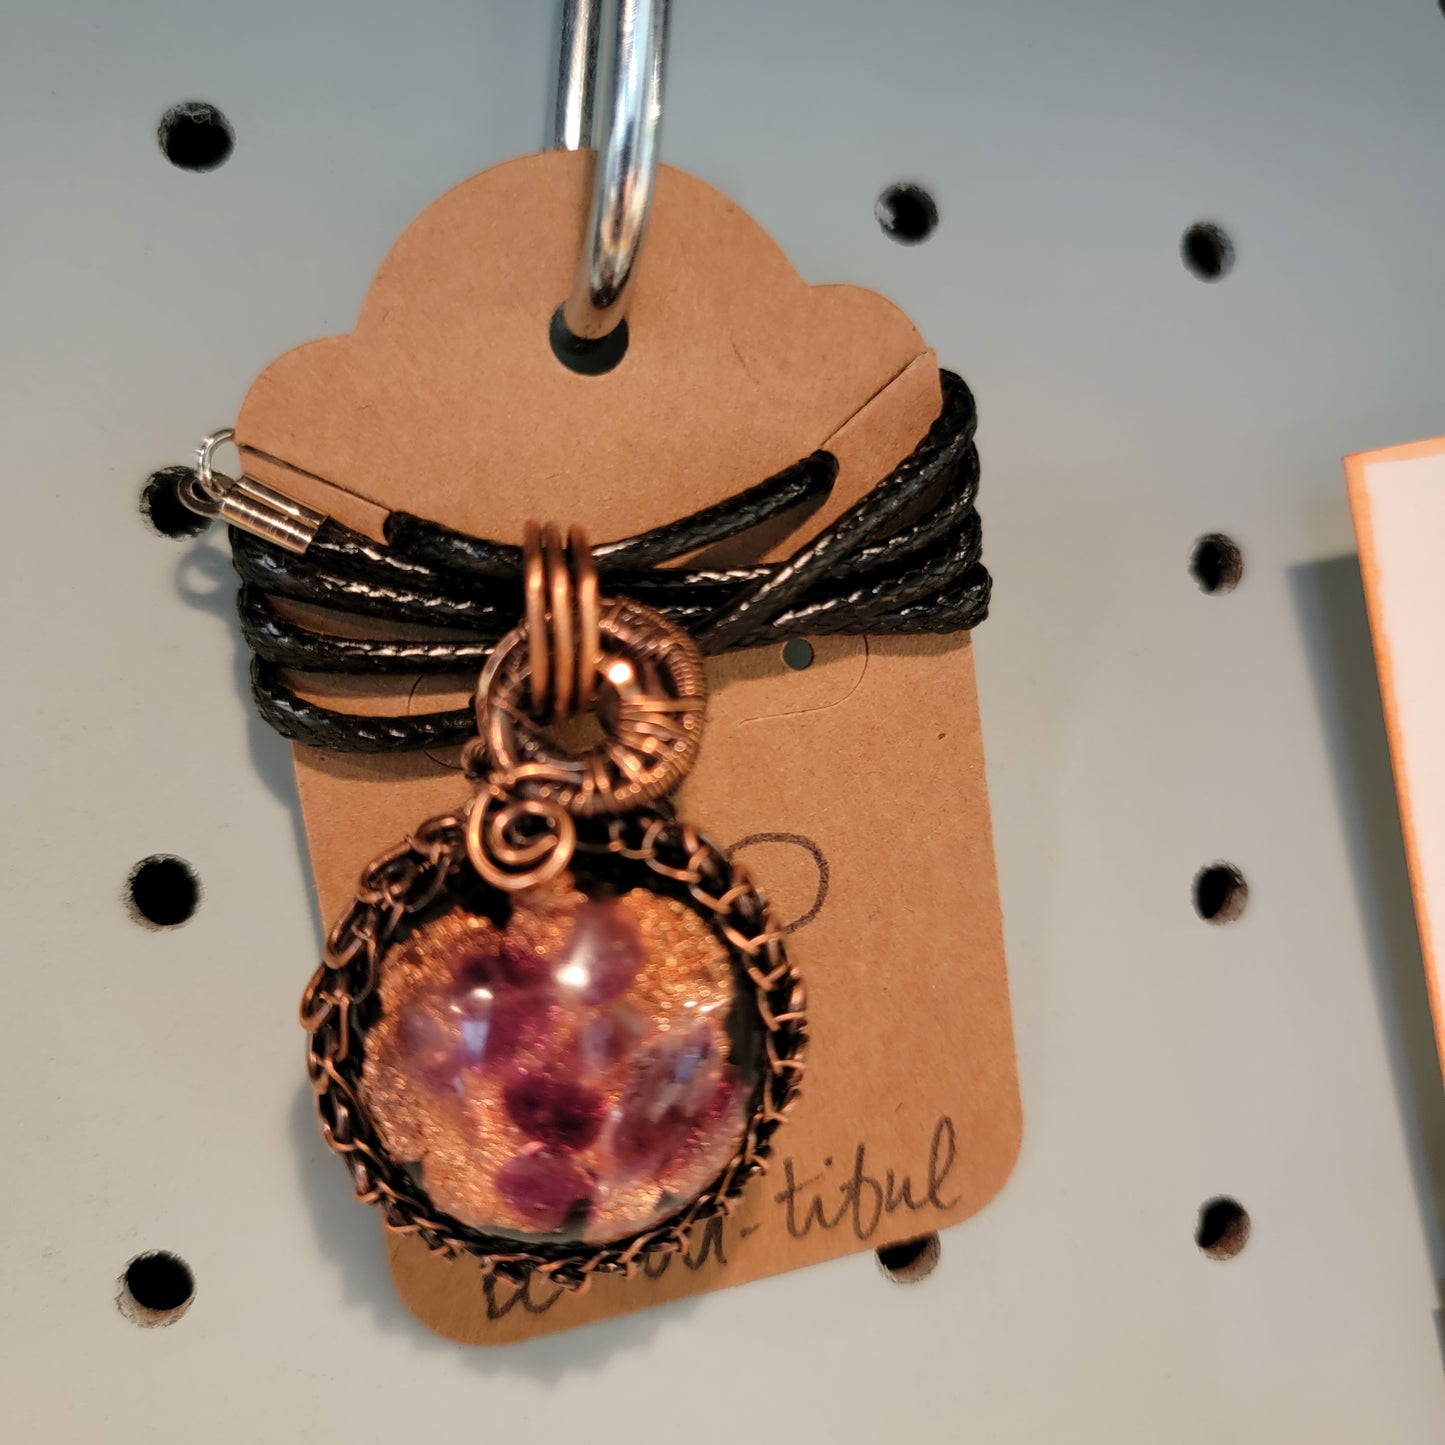 Copper Wrapped Orgonite Pendant Necklace with Copper Foil